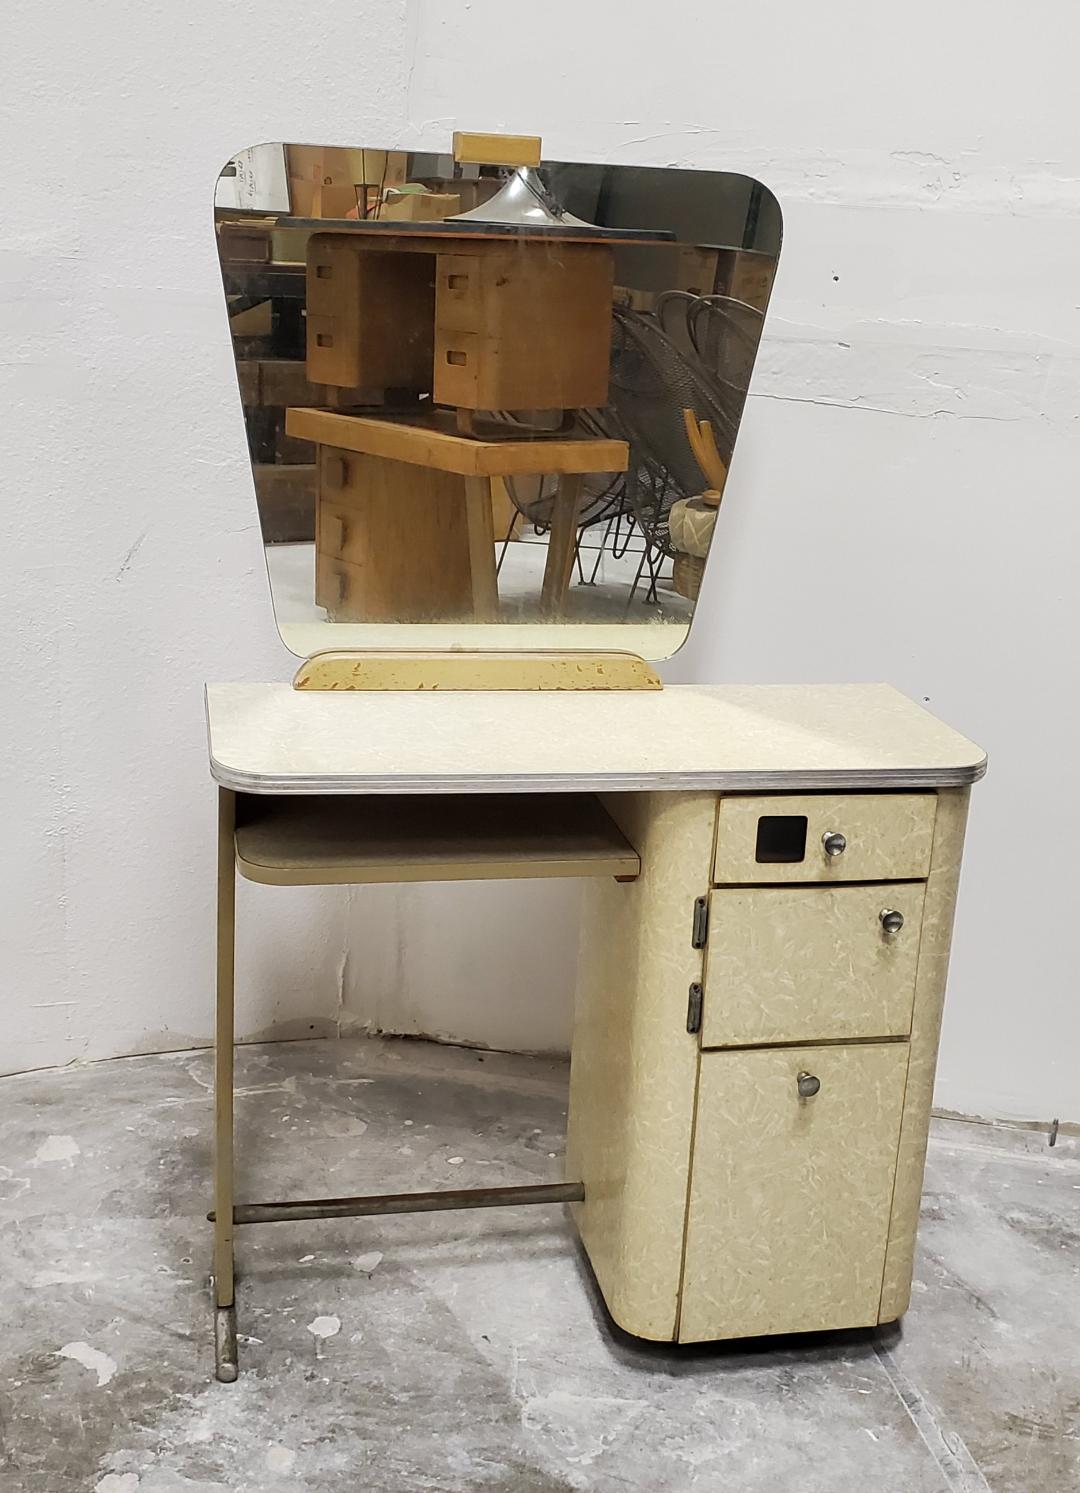 1950s Free standing beauty salon styling station with mirror vanity hair salon
This is a free standing vintage styling station with it's original mirror.

The beauty styling station has the iconic beige ICE CRACKED FORMICA, grooved aluminum